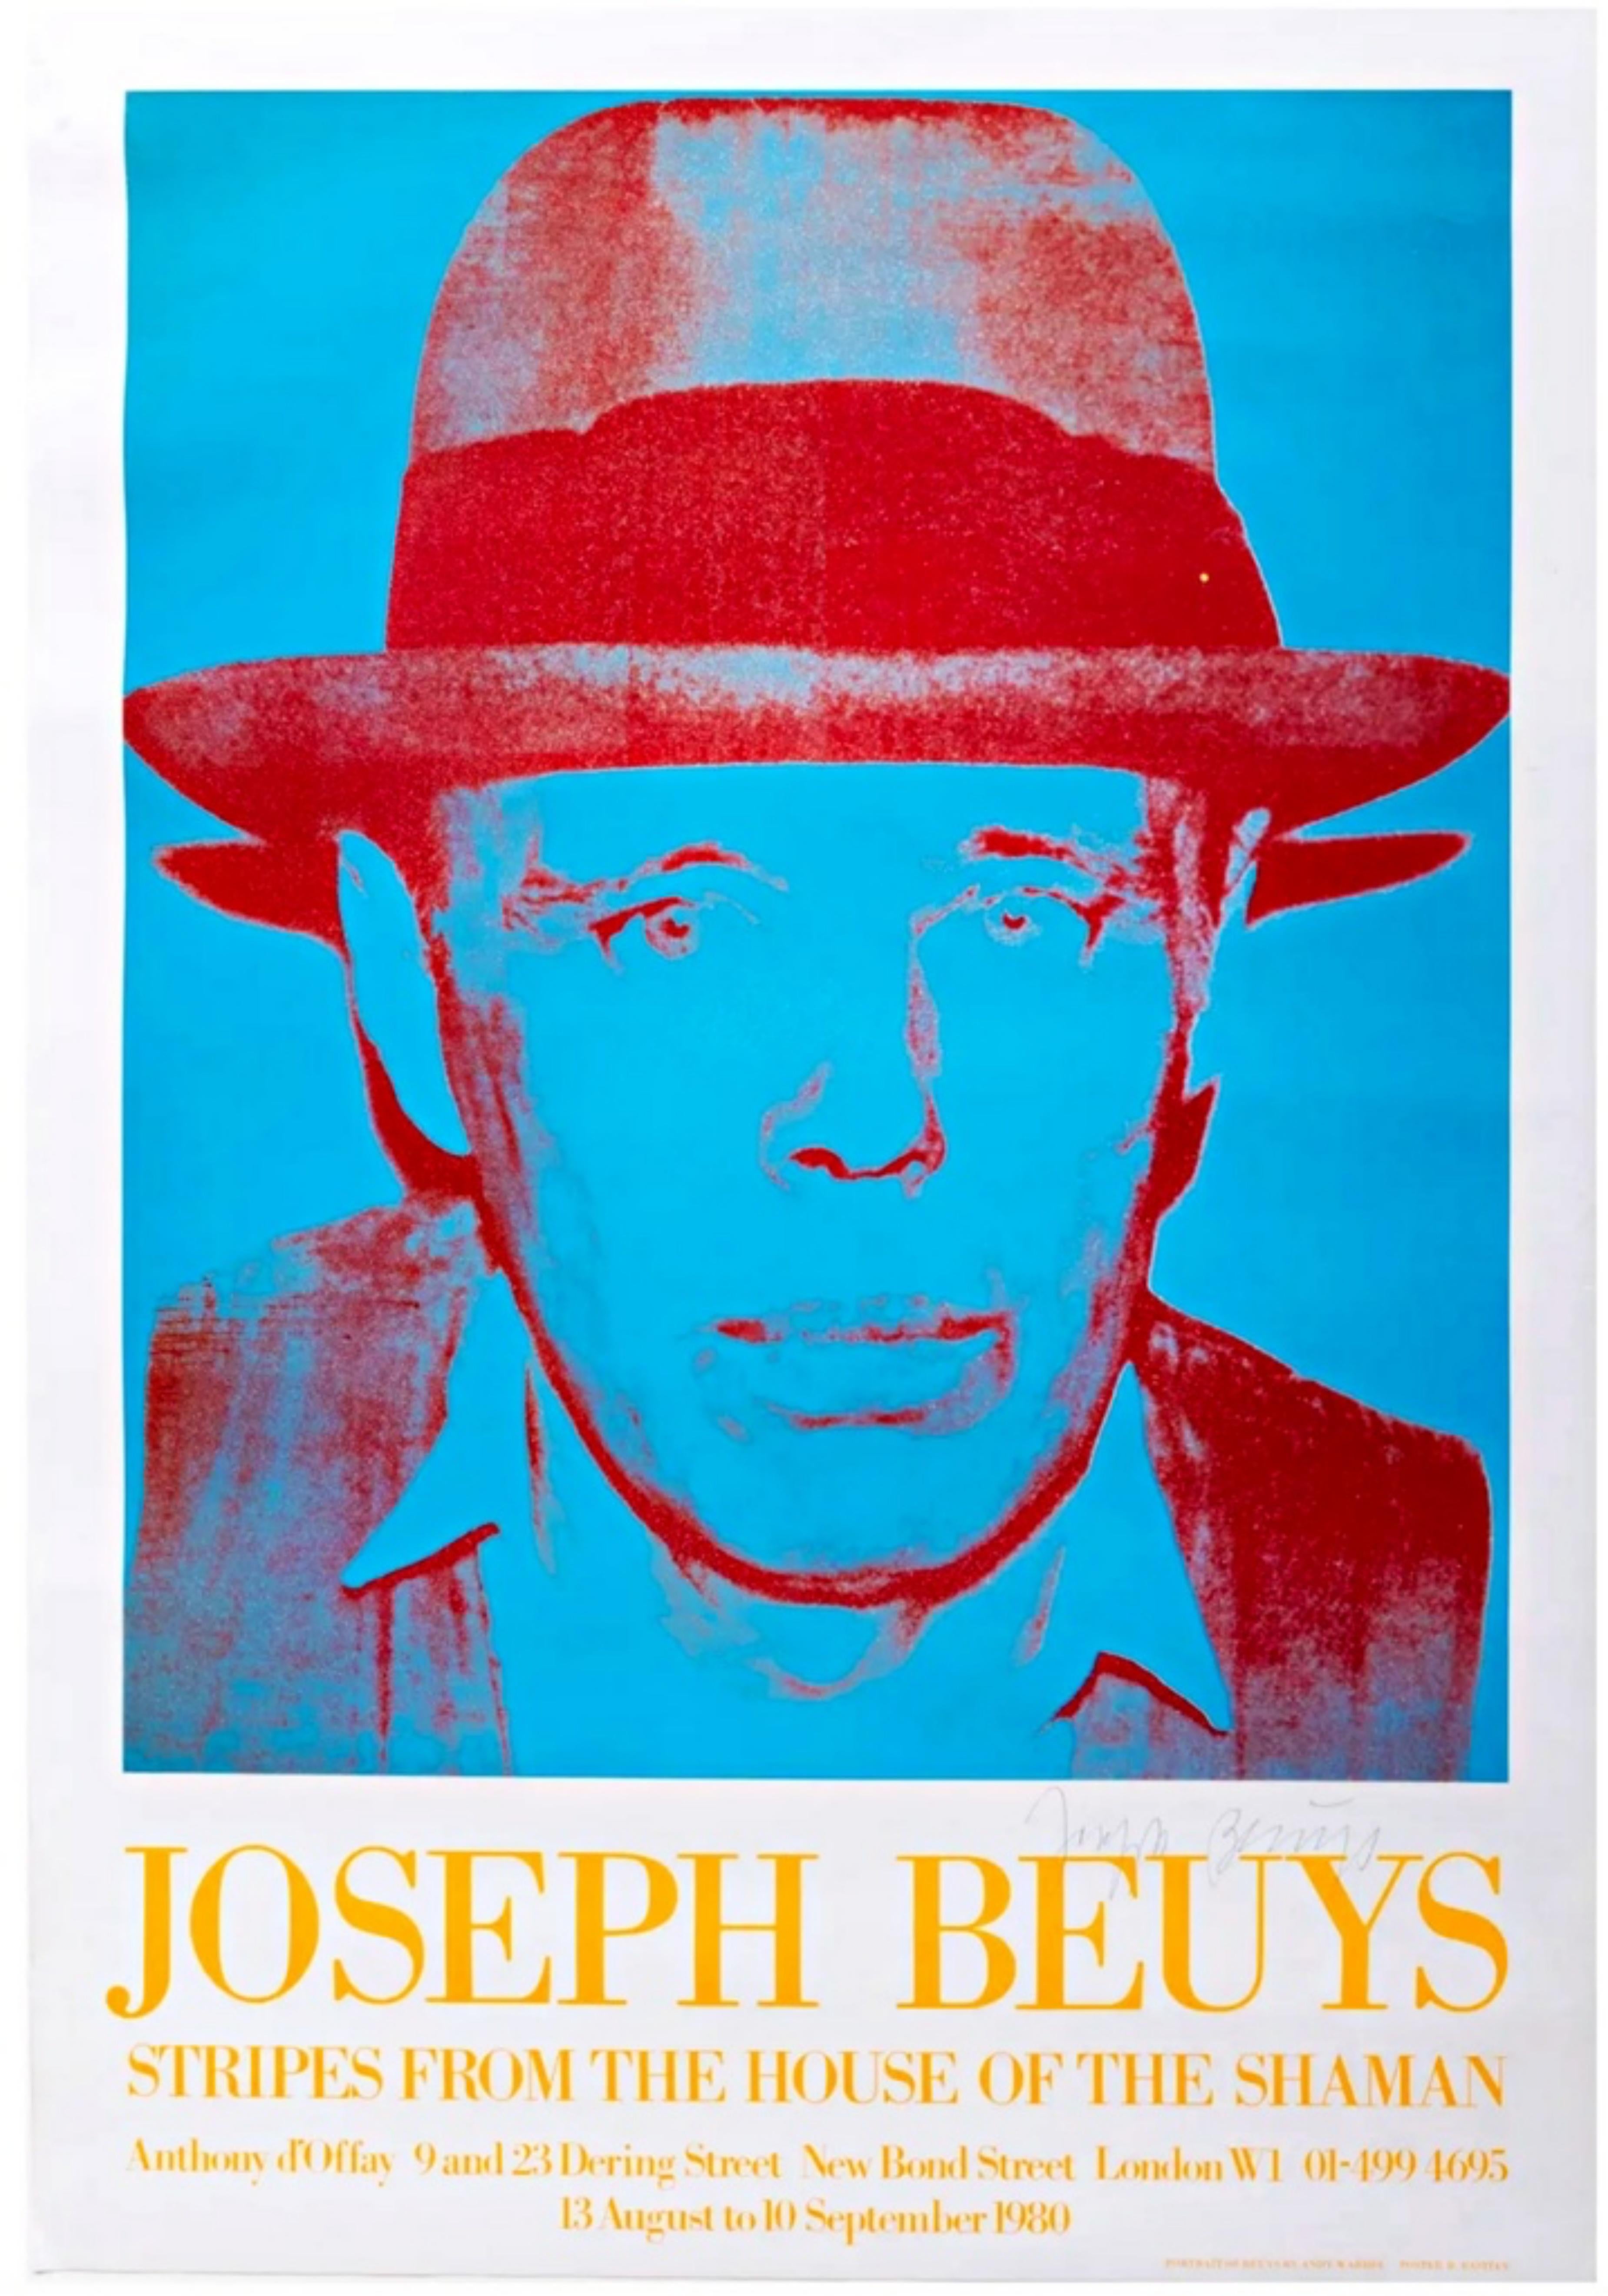 Joseph Beuys
Stripes from the House of the Shaman (Hand Signed), 1980
Offset lithograph hand signed by Joseph Beuys
Boldly signed on the recto in graphite pencil by Joseph Beuys
Published by: Anthony D'Offay Gallery, London
Frame included: held in